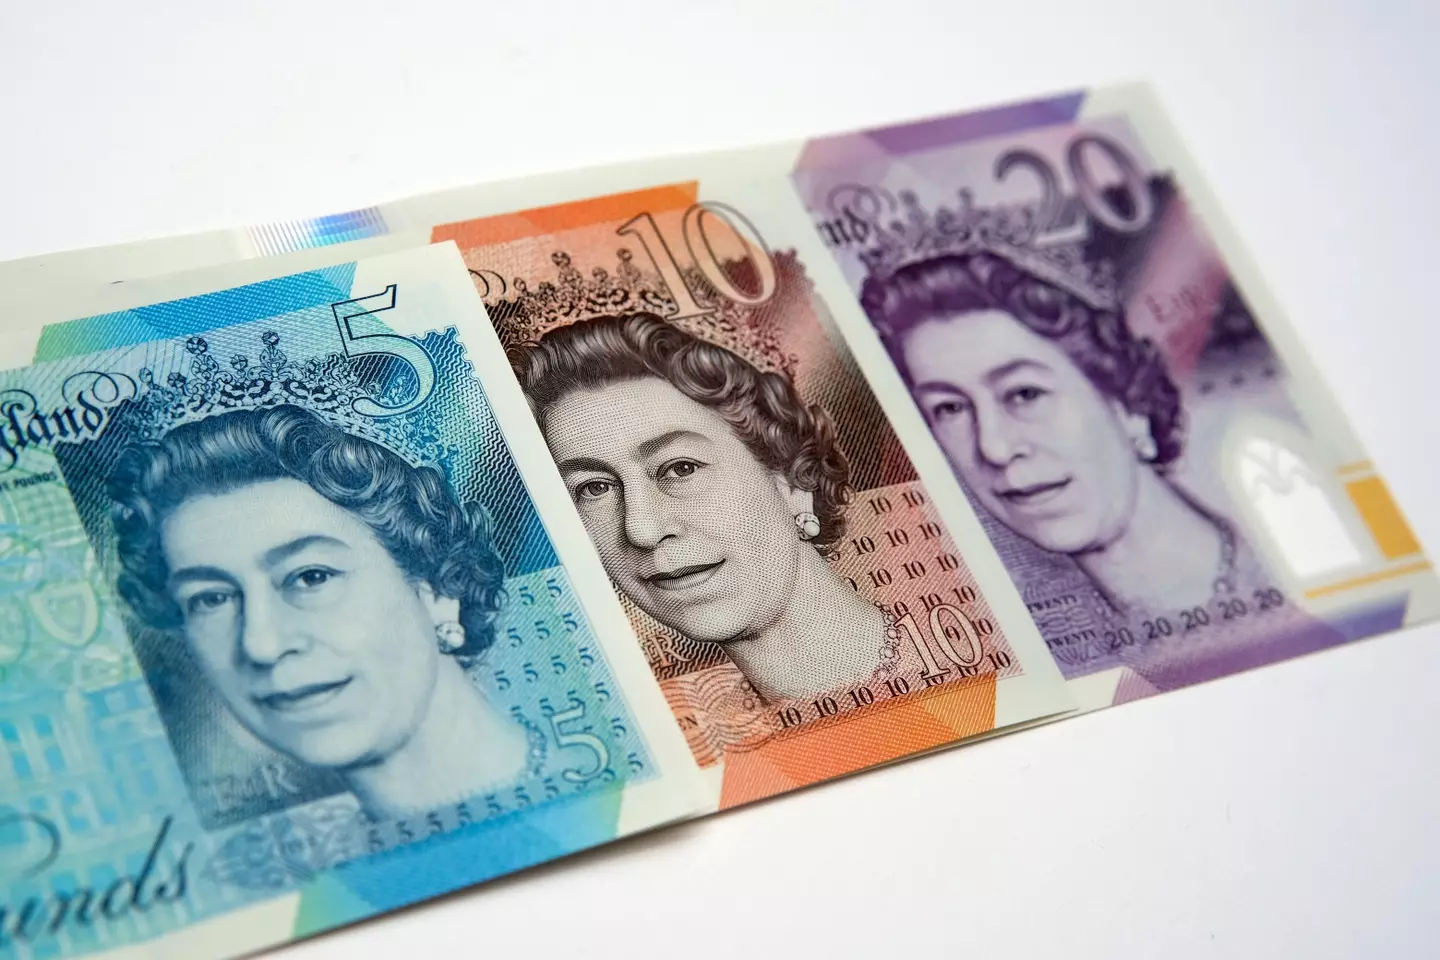 The portrait of the Queen which appeared on UK banknotes is from 1990.